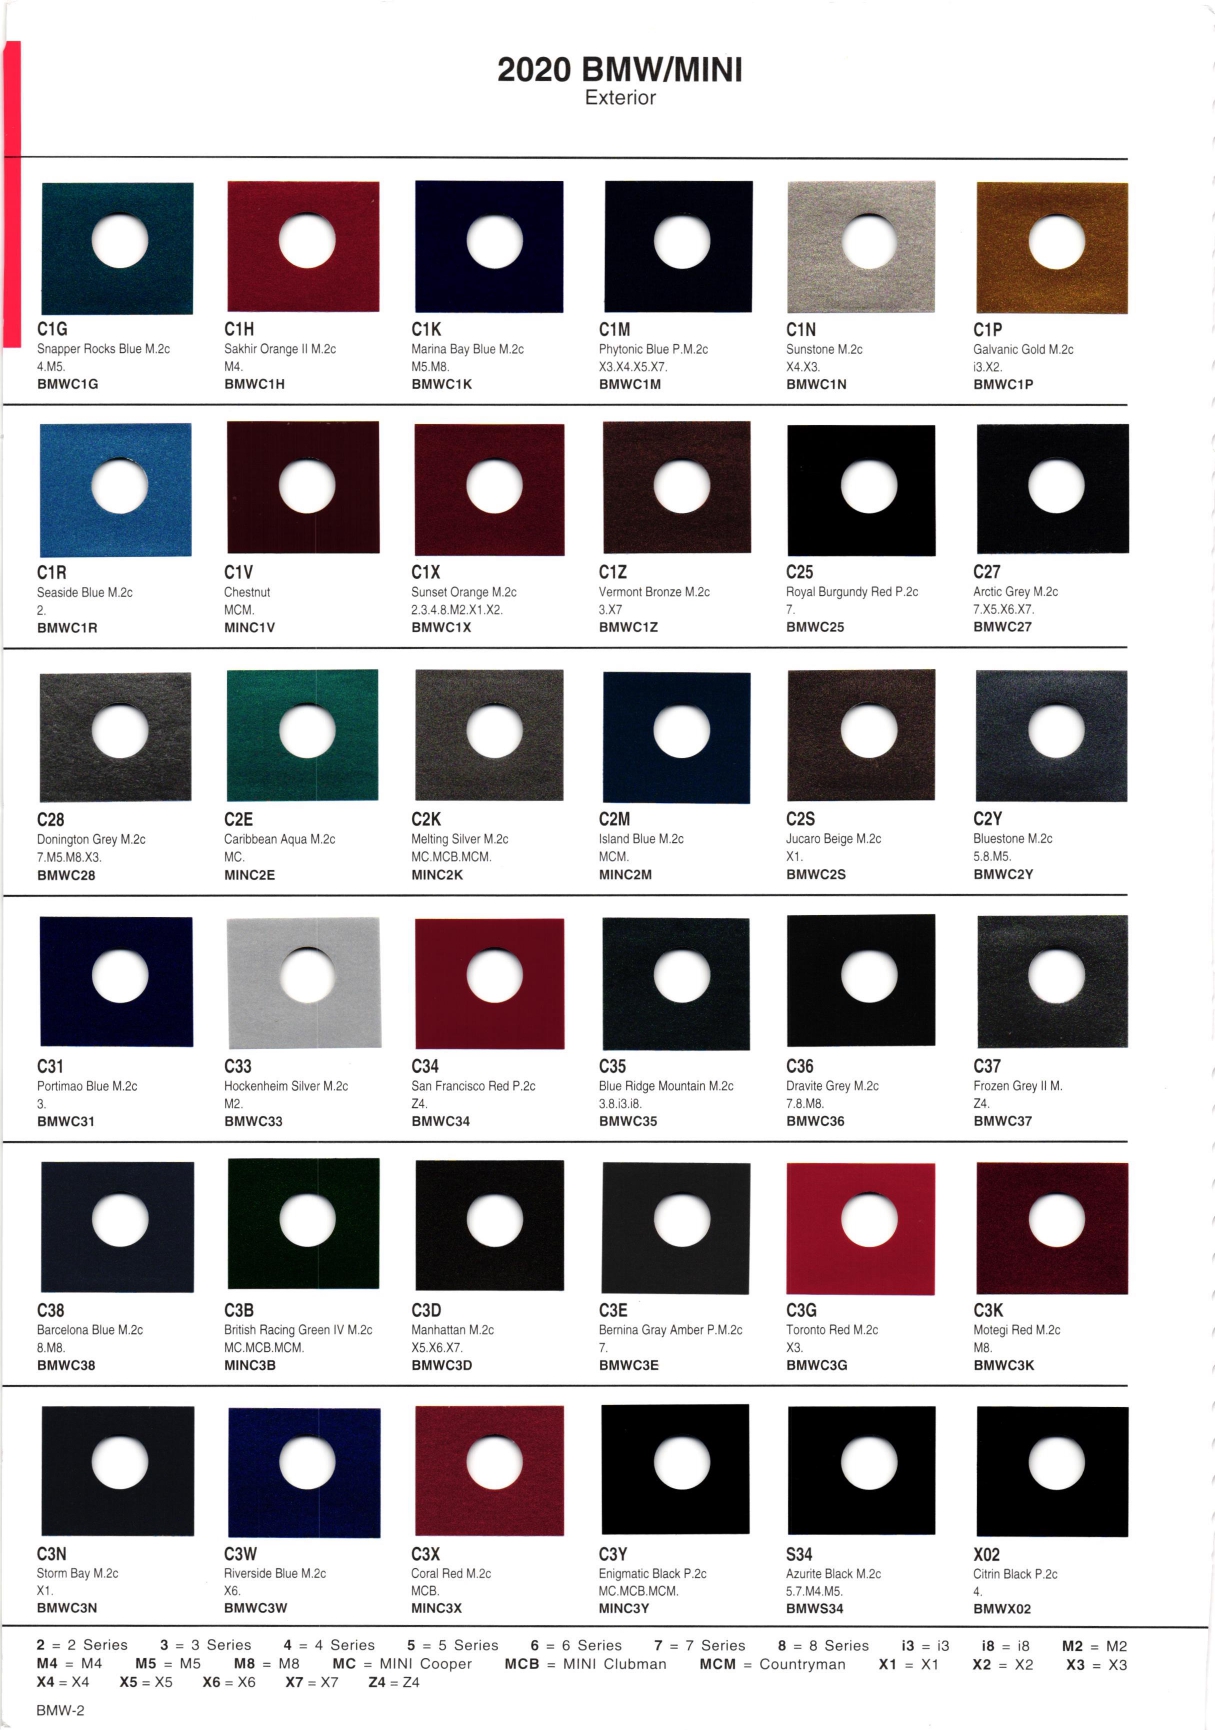 Exterior Color Chips, and their ordering codes for BMW Vehicles in 2020